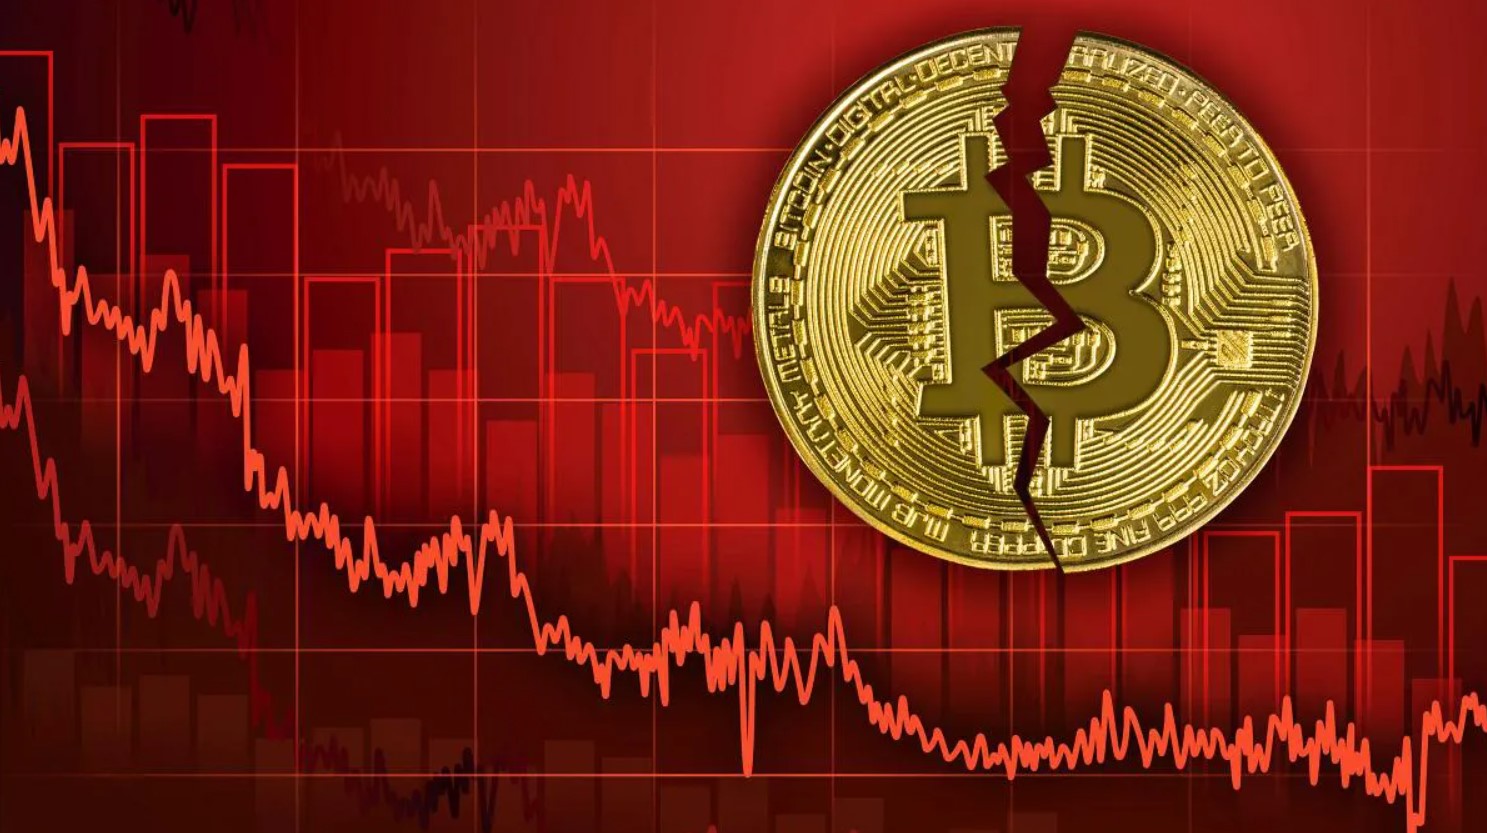 Reasons why all cryptocurrencies have crashed in 24 hours